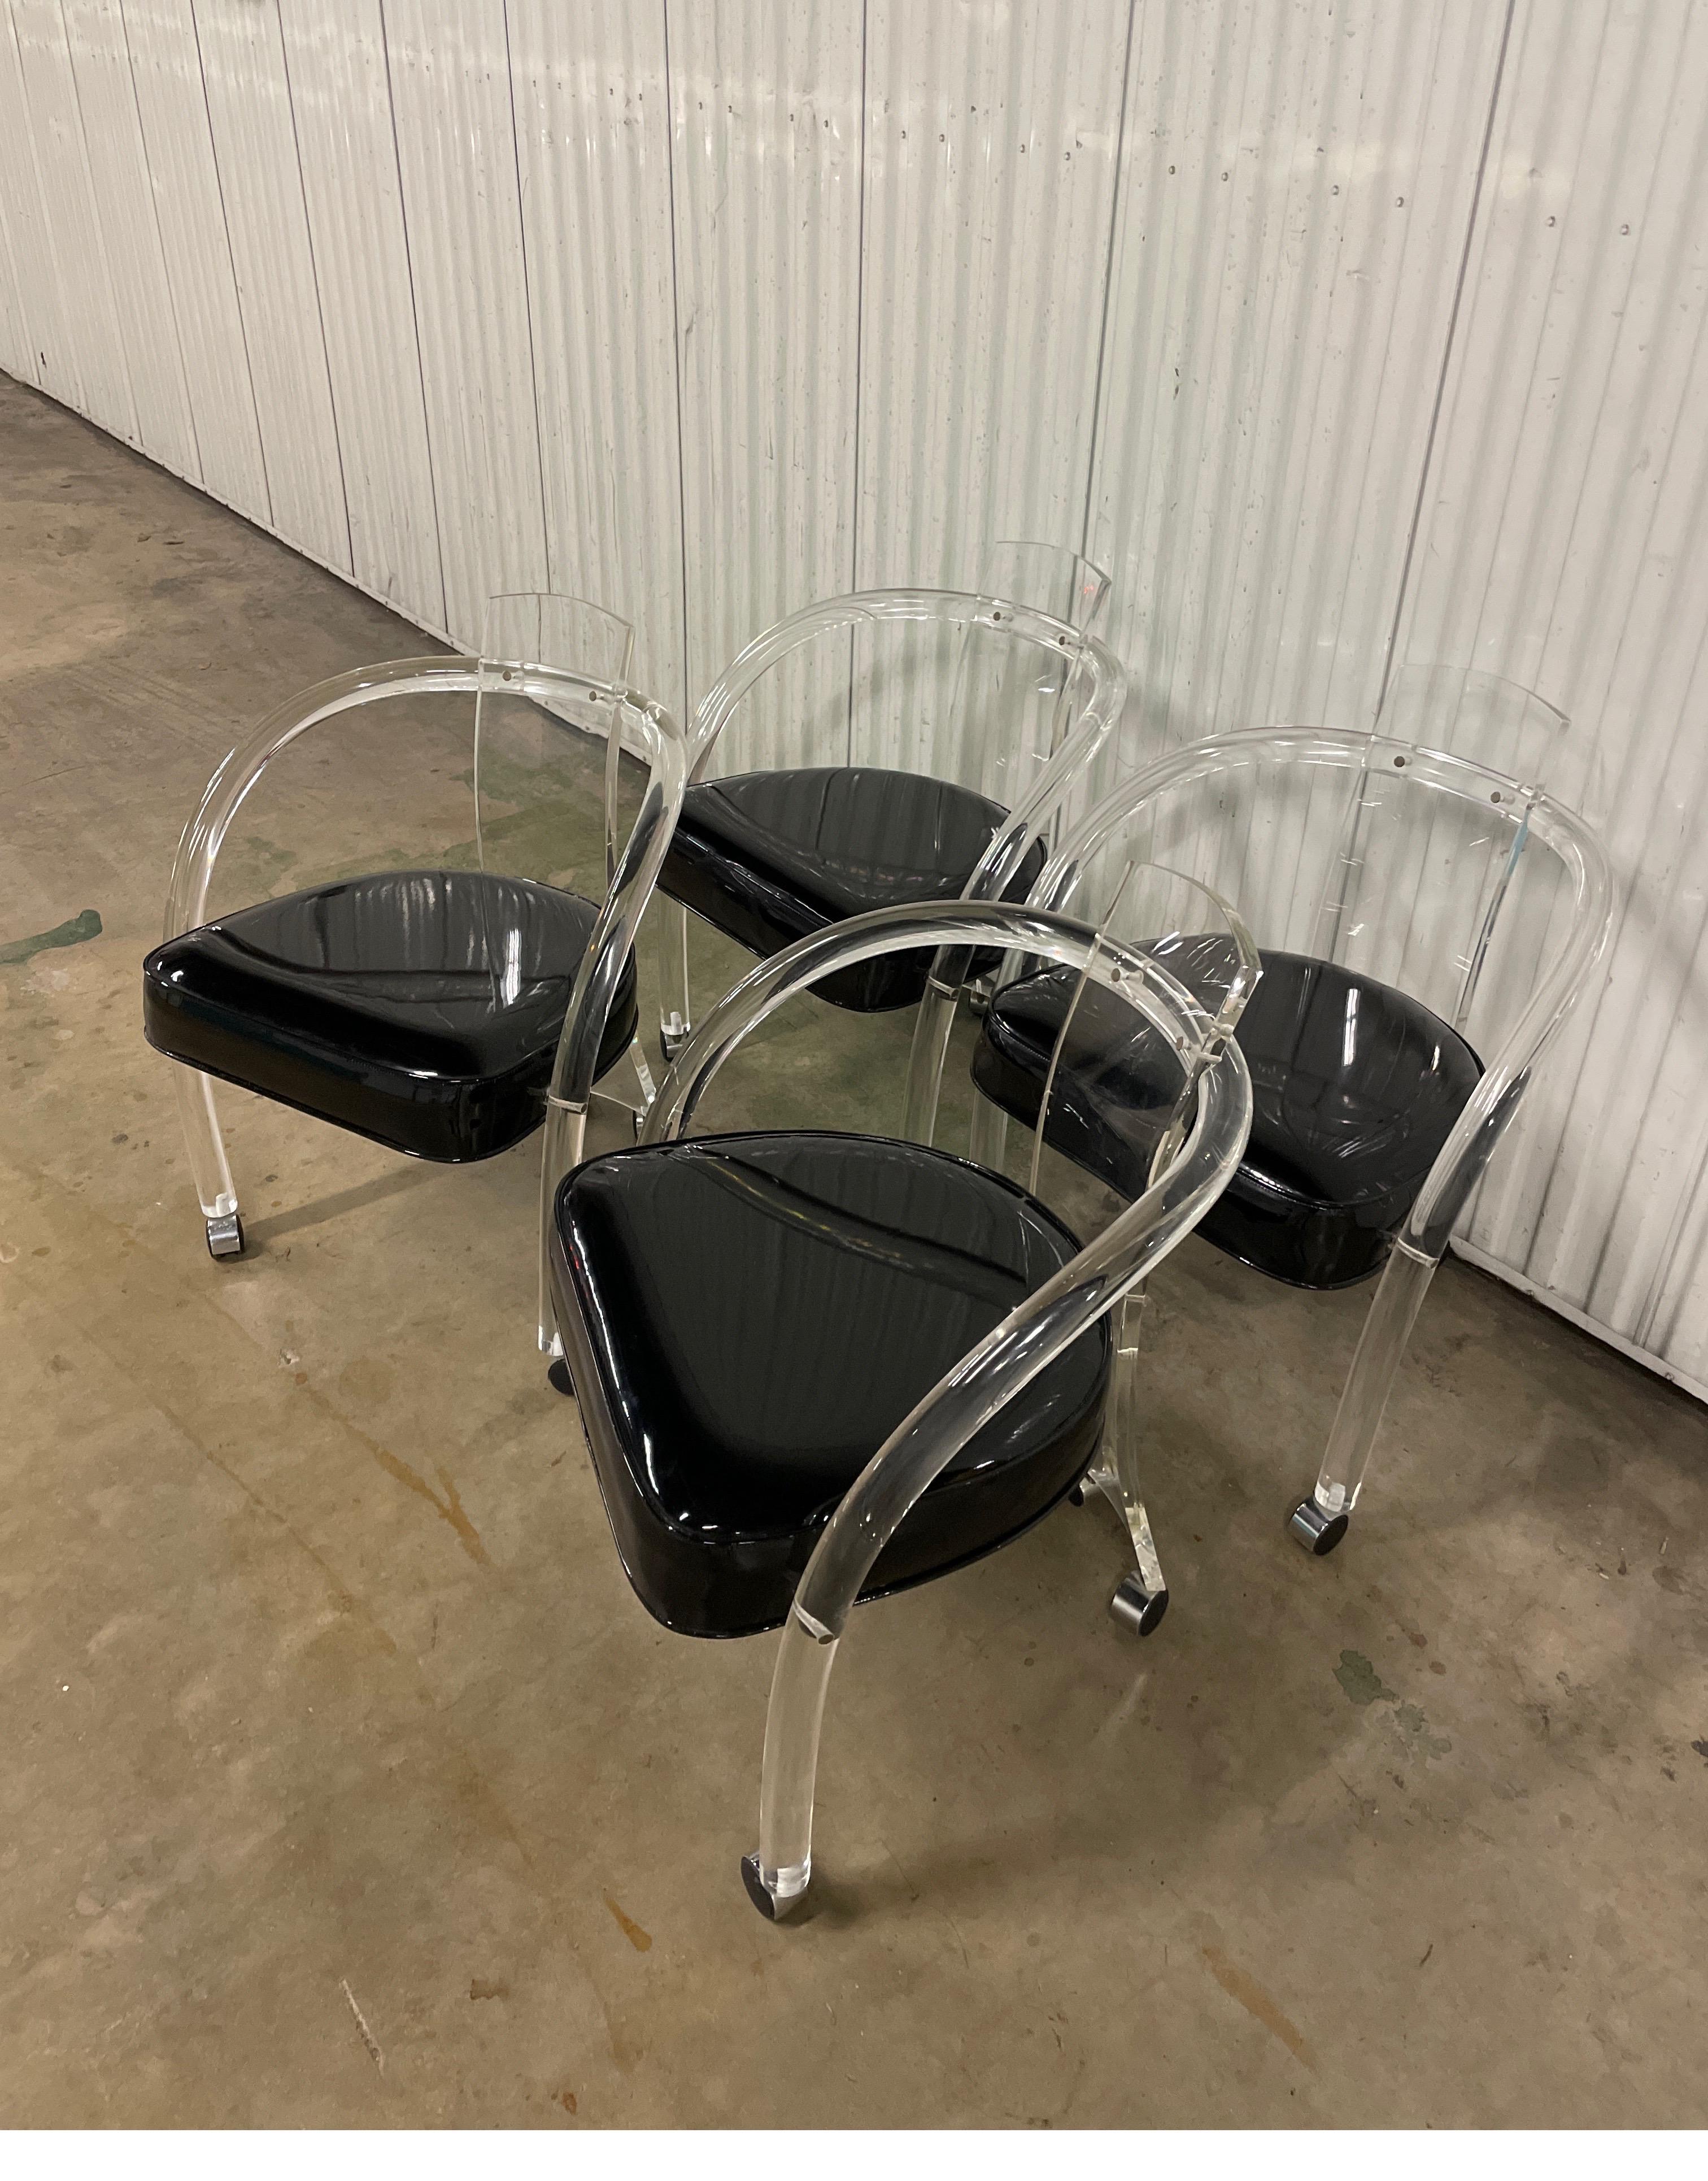 Vintage set of mid century lucite club chairs on casters with original black patent leather seats. These chairs were made by Hill Manufacturers for Charles Hollis Jones.